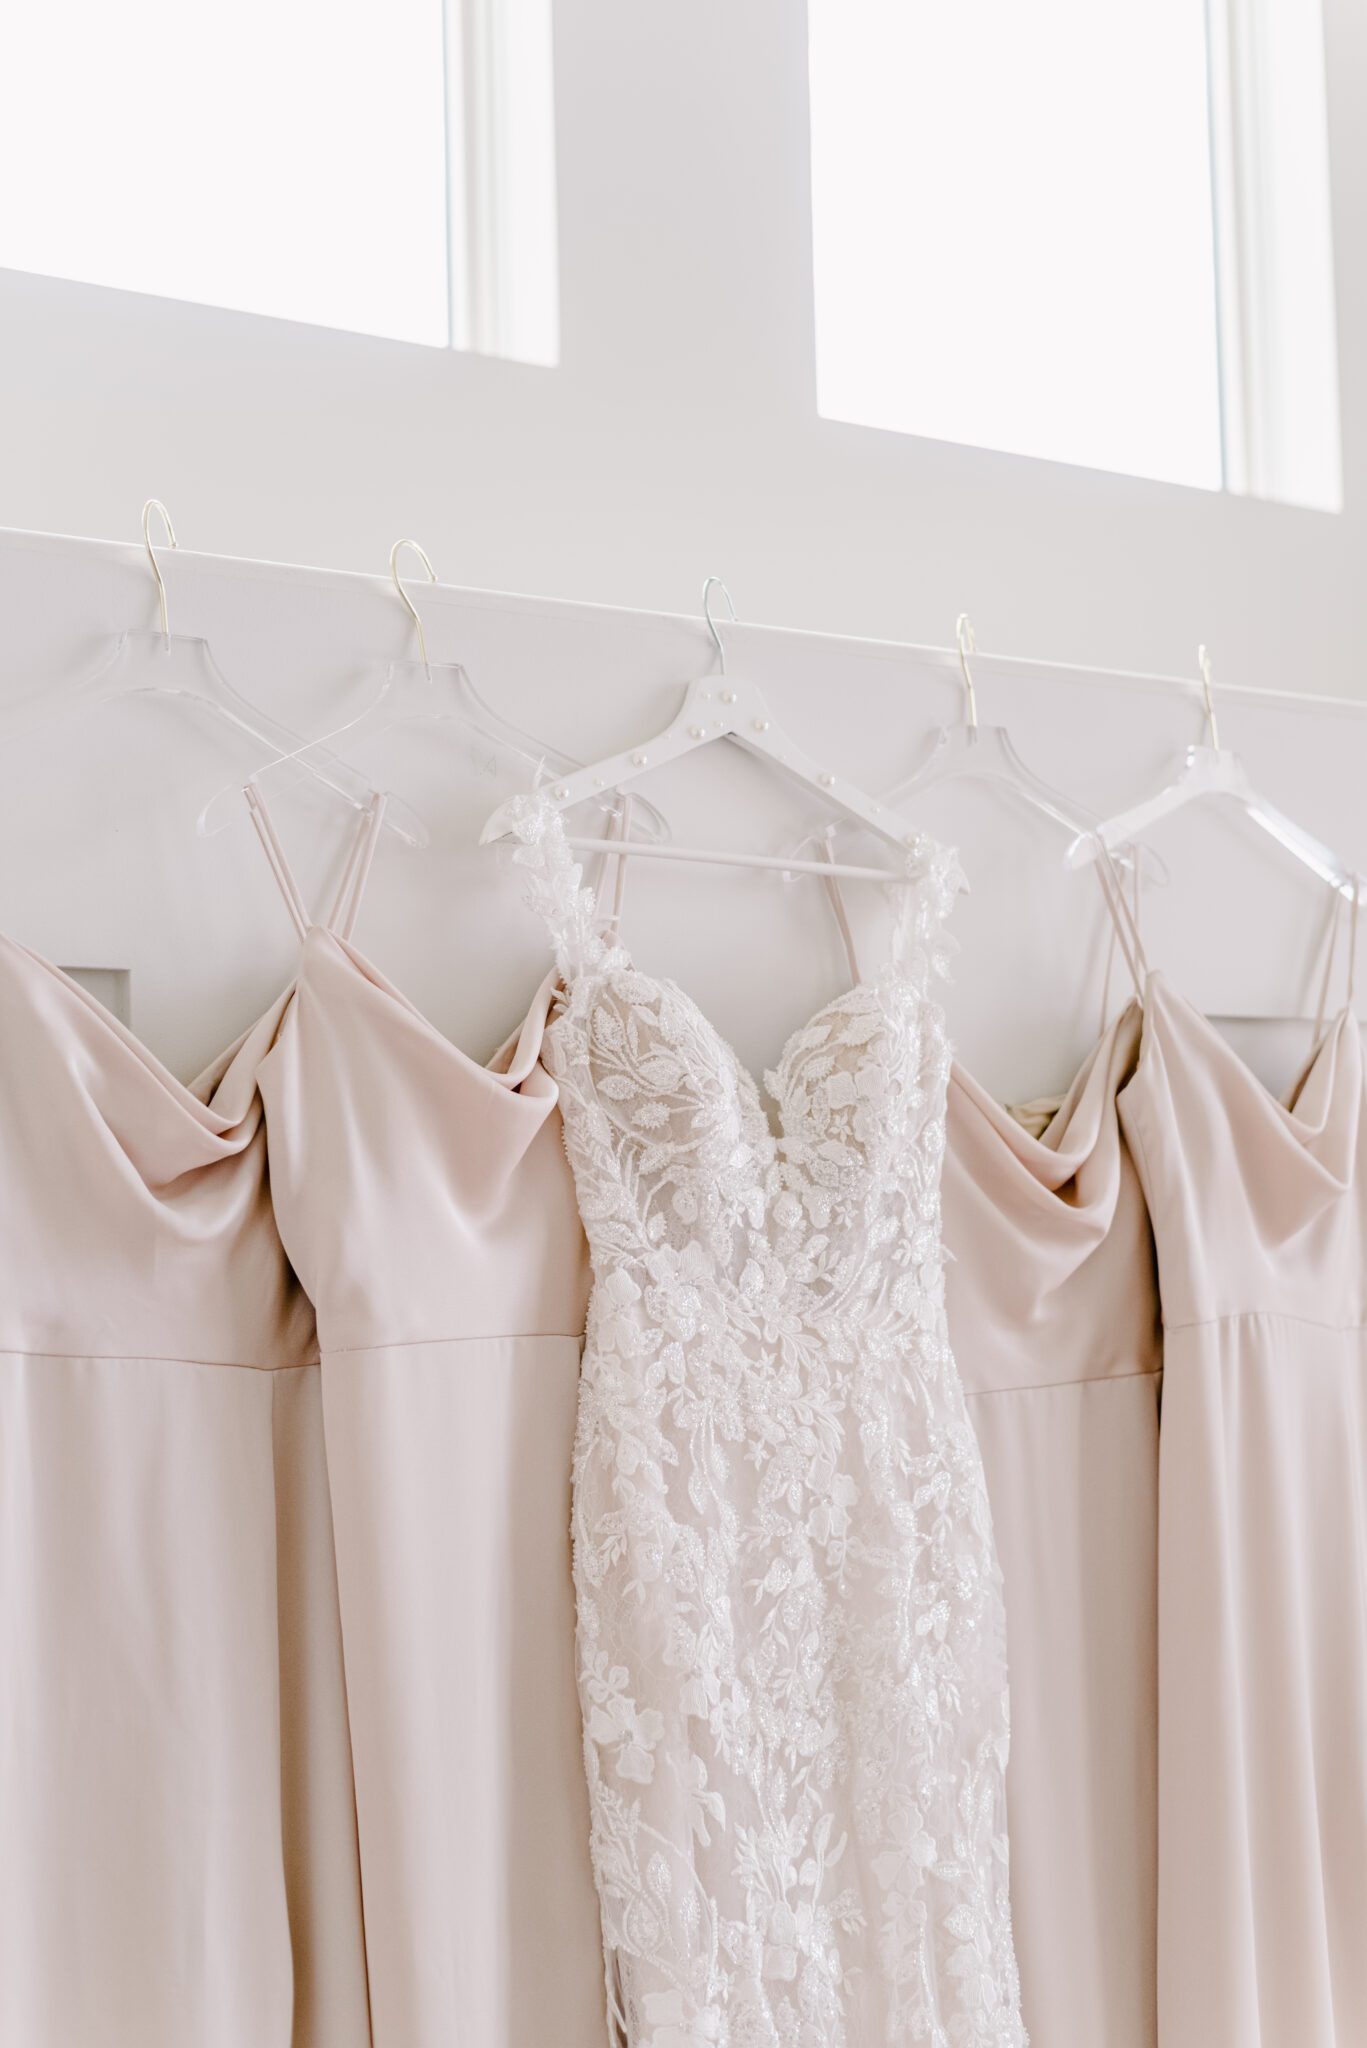 Lace bridal gown from Cameo & Cufflinks, hanging with blush Hayley Paige bridesmaids dresses.